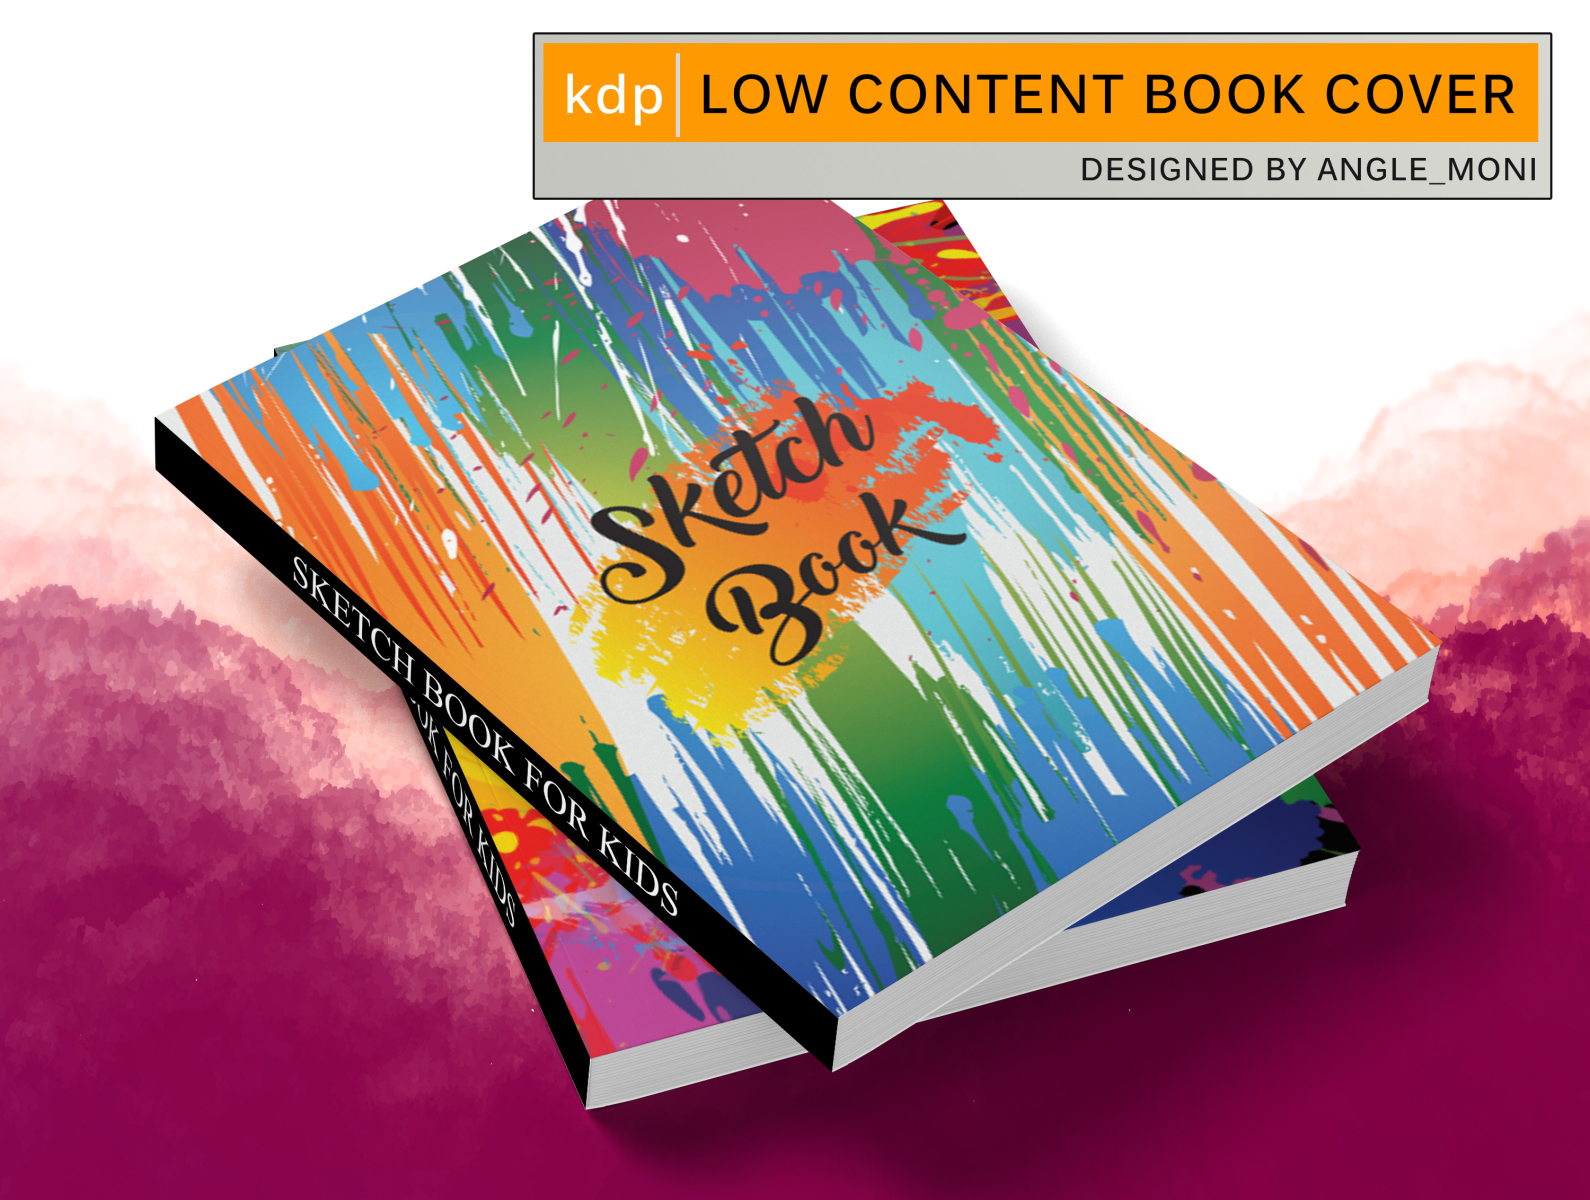 kdp book cover template download